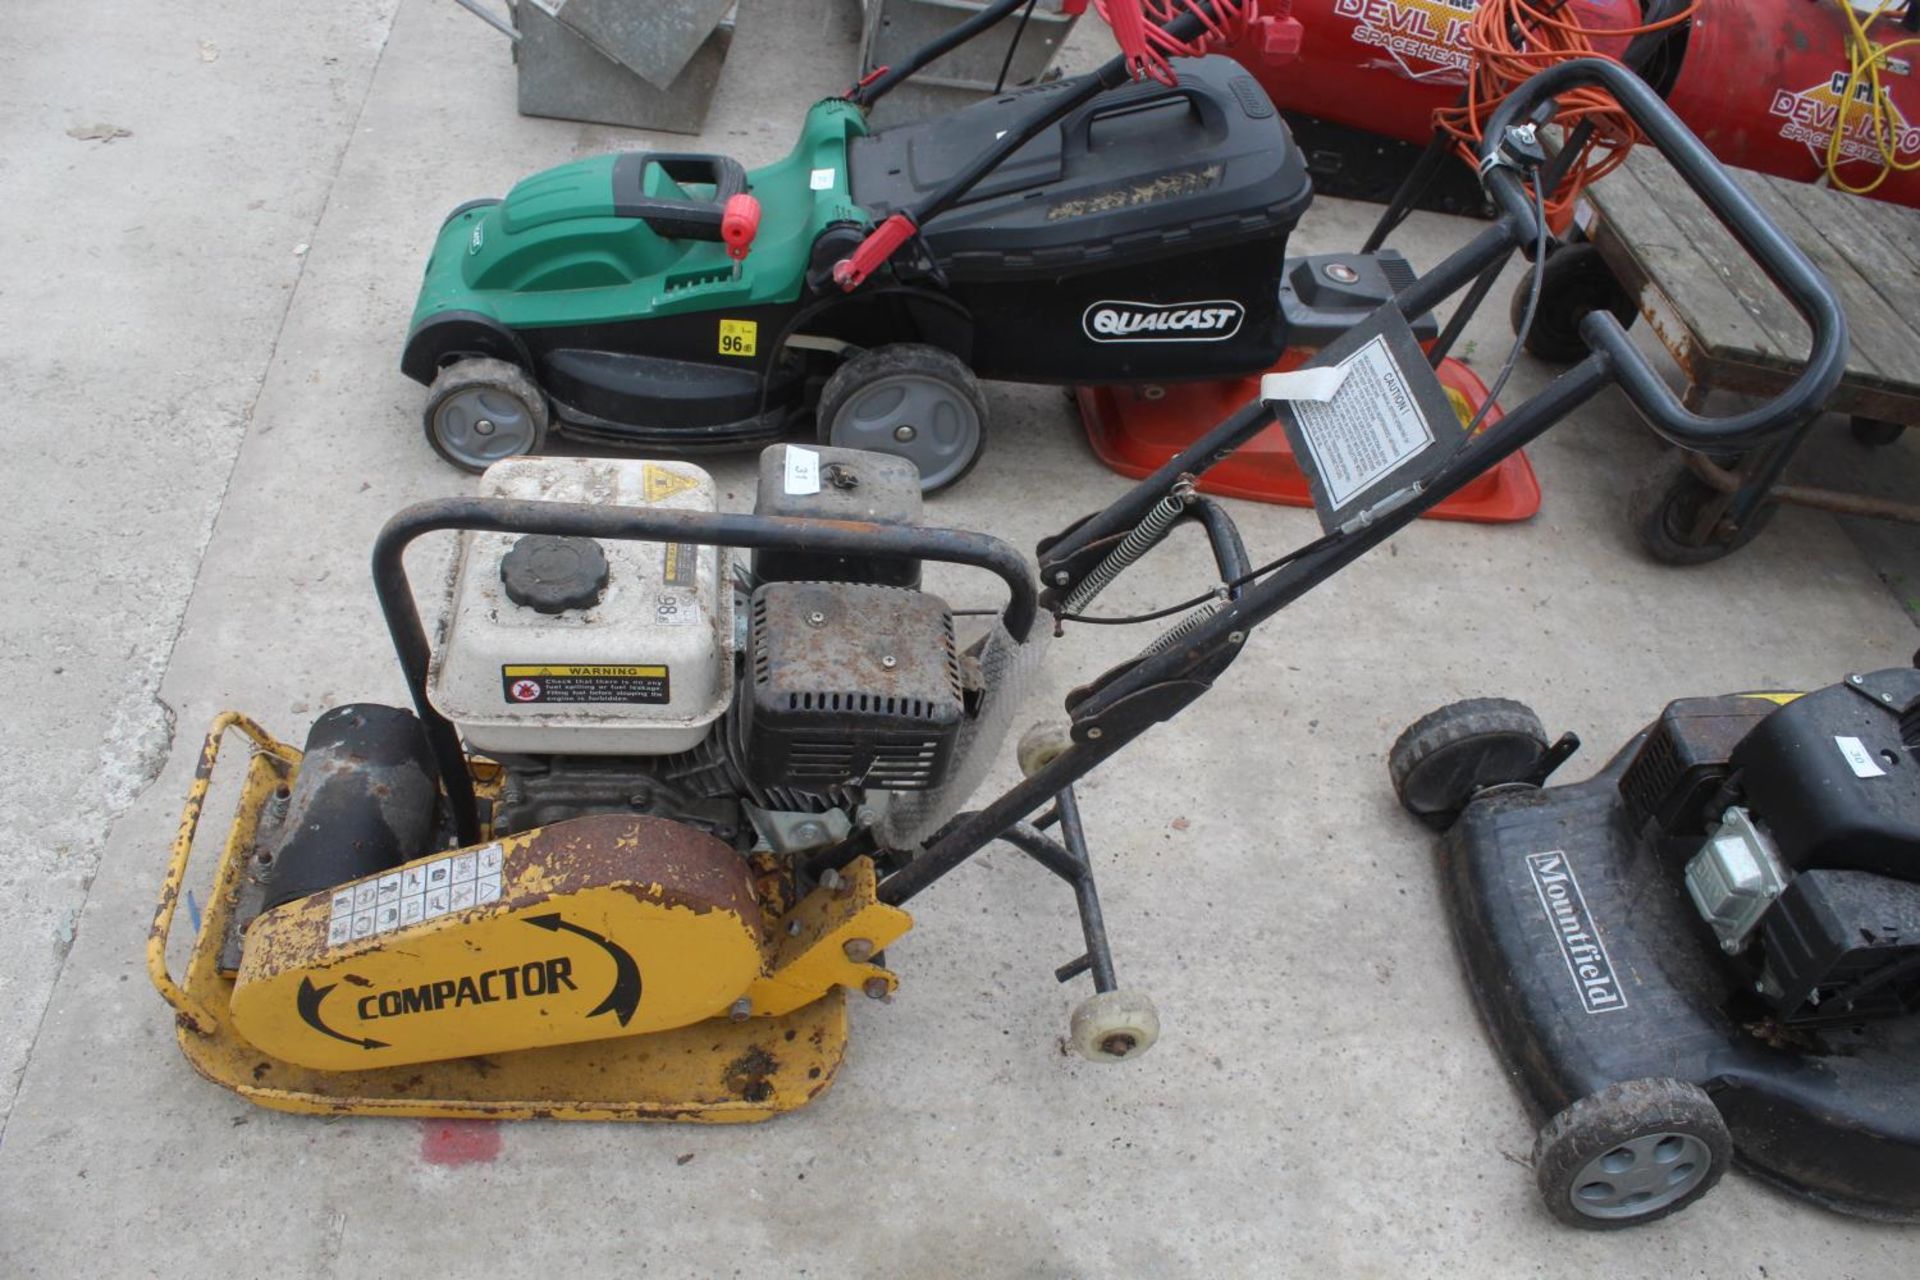 A PETROL COMPACTOR WACKER PLATE BELIEVED IN WORKING ORDER BUT NO WARRANTY GIVEN NO-VAT